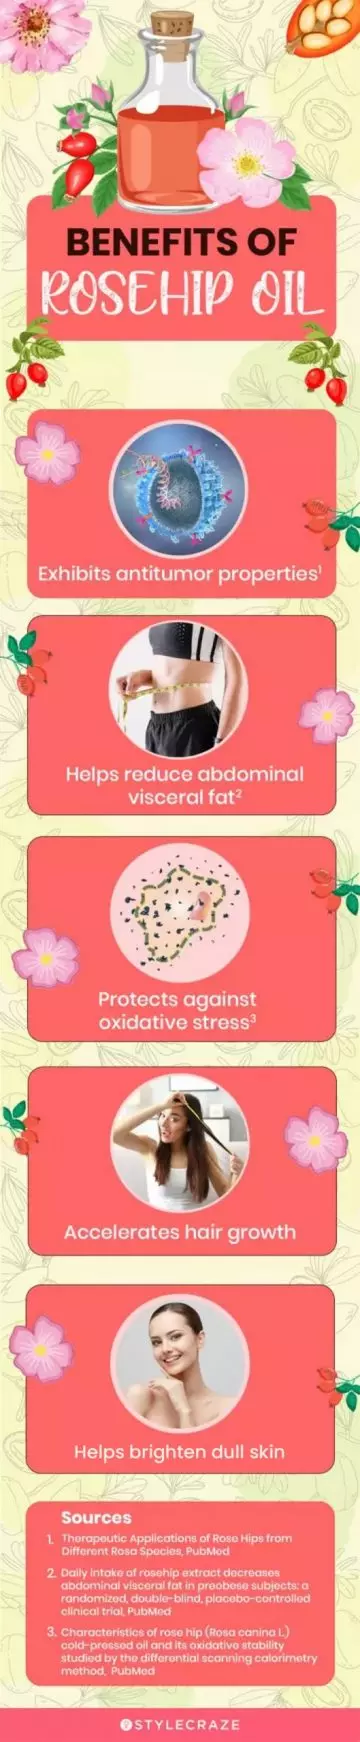 benefits of rosehip oil (infographic)